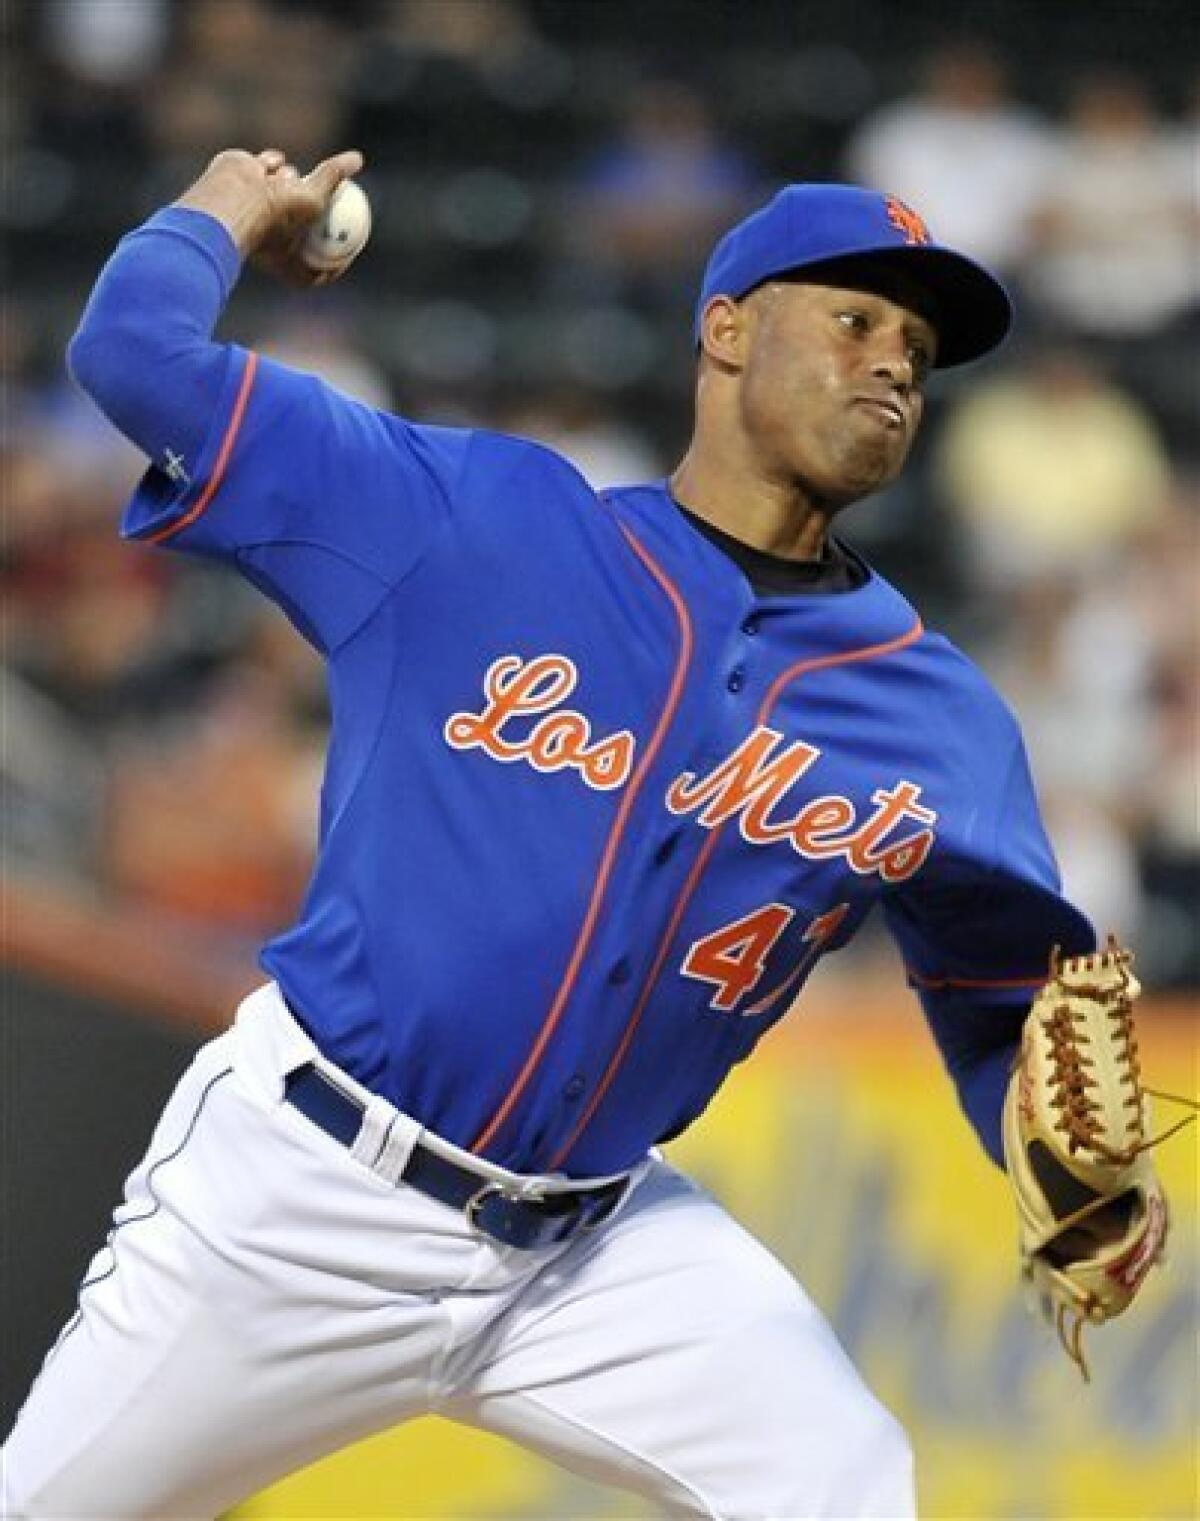 Batista pitches Mets past sloppy Marlins 7-5 - The San Diego Union-Tribune